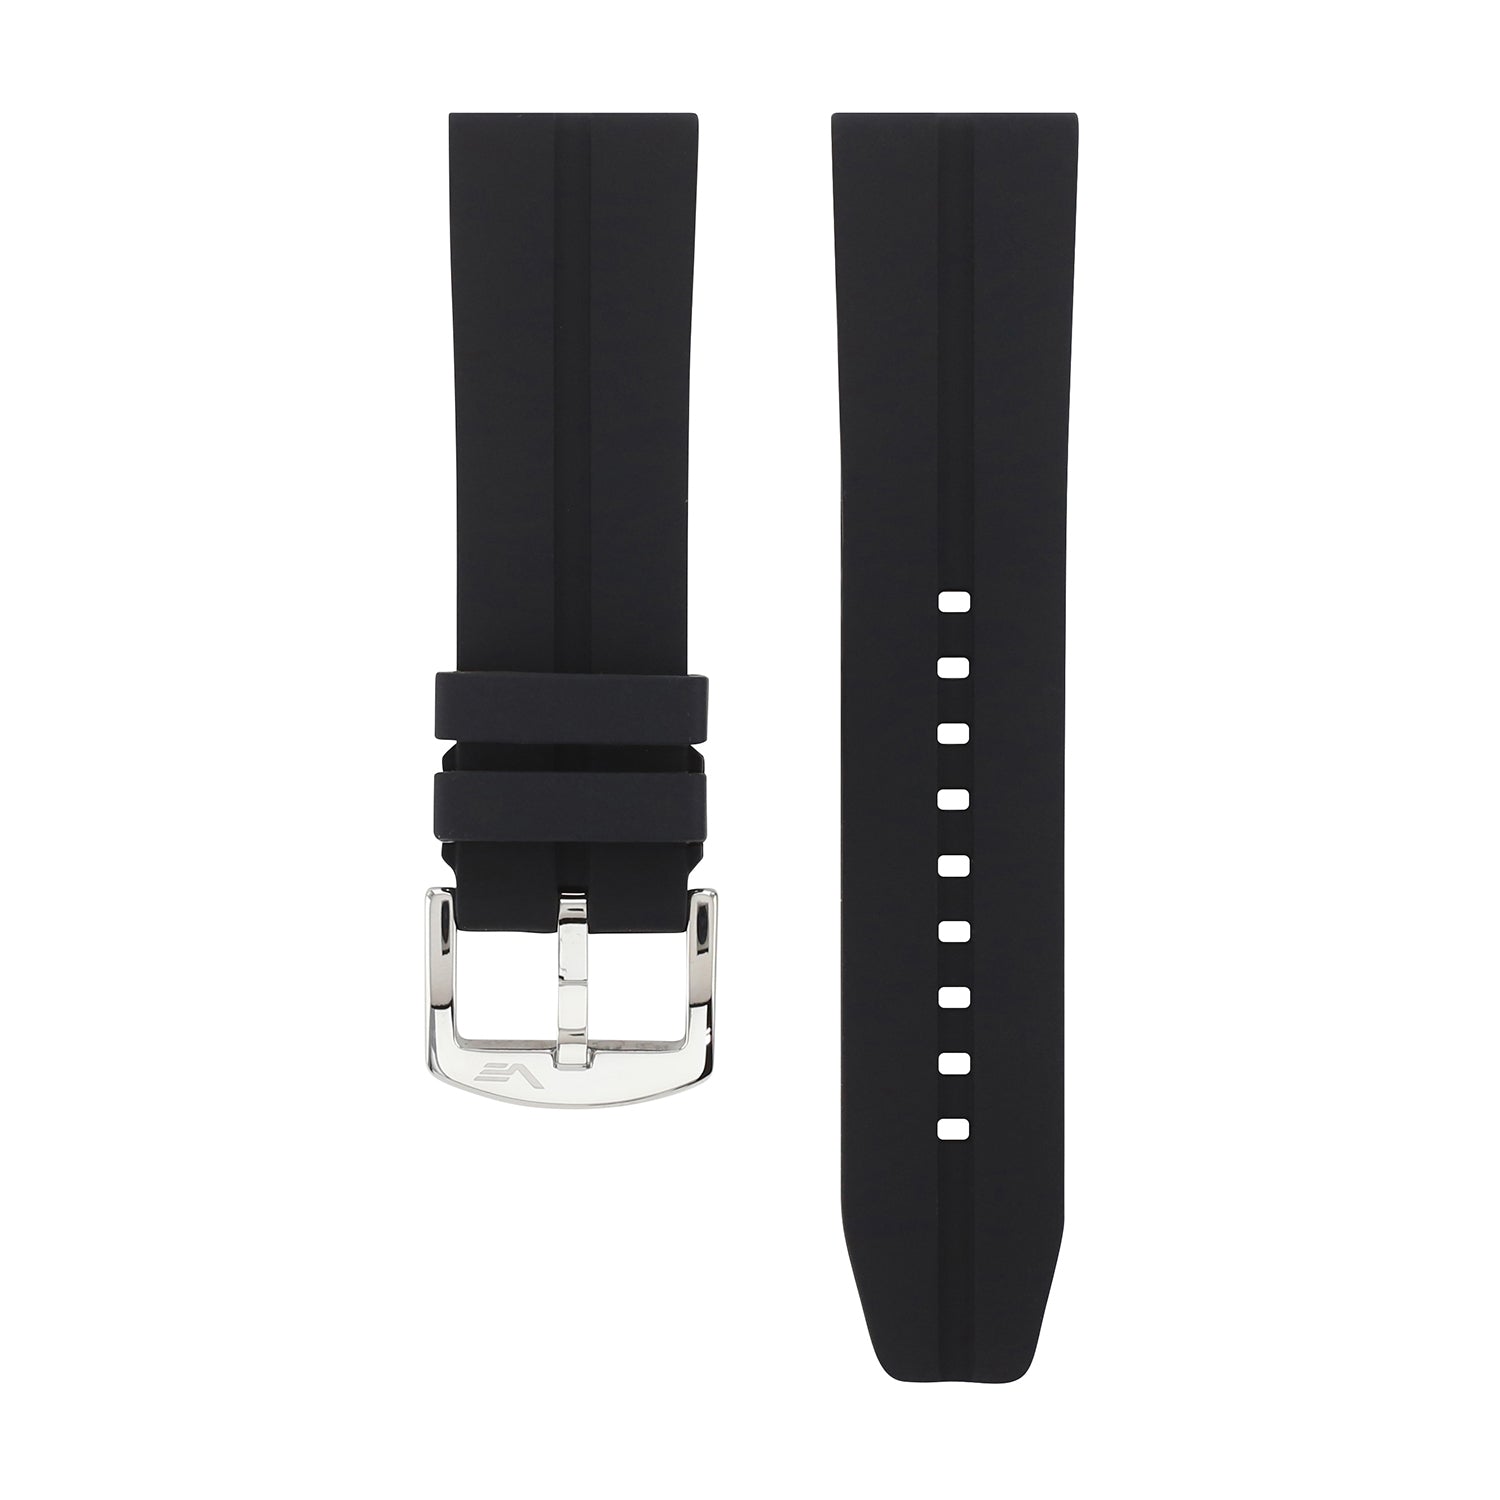 EXPEDITION BLACK SILICONE STRAP 24mm - POLISHED BUCKLE